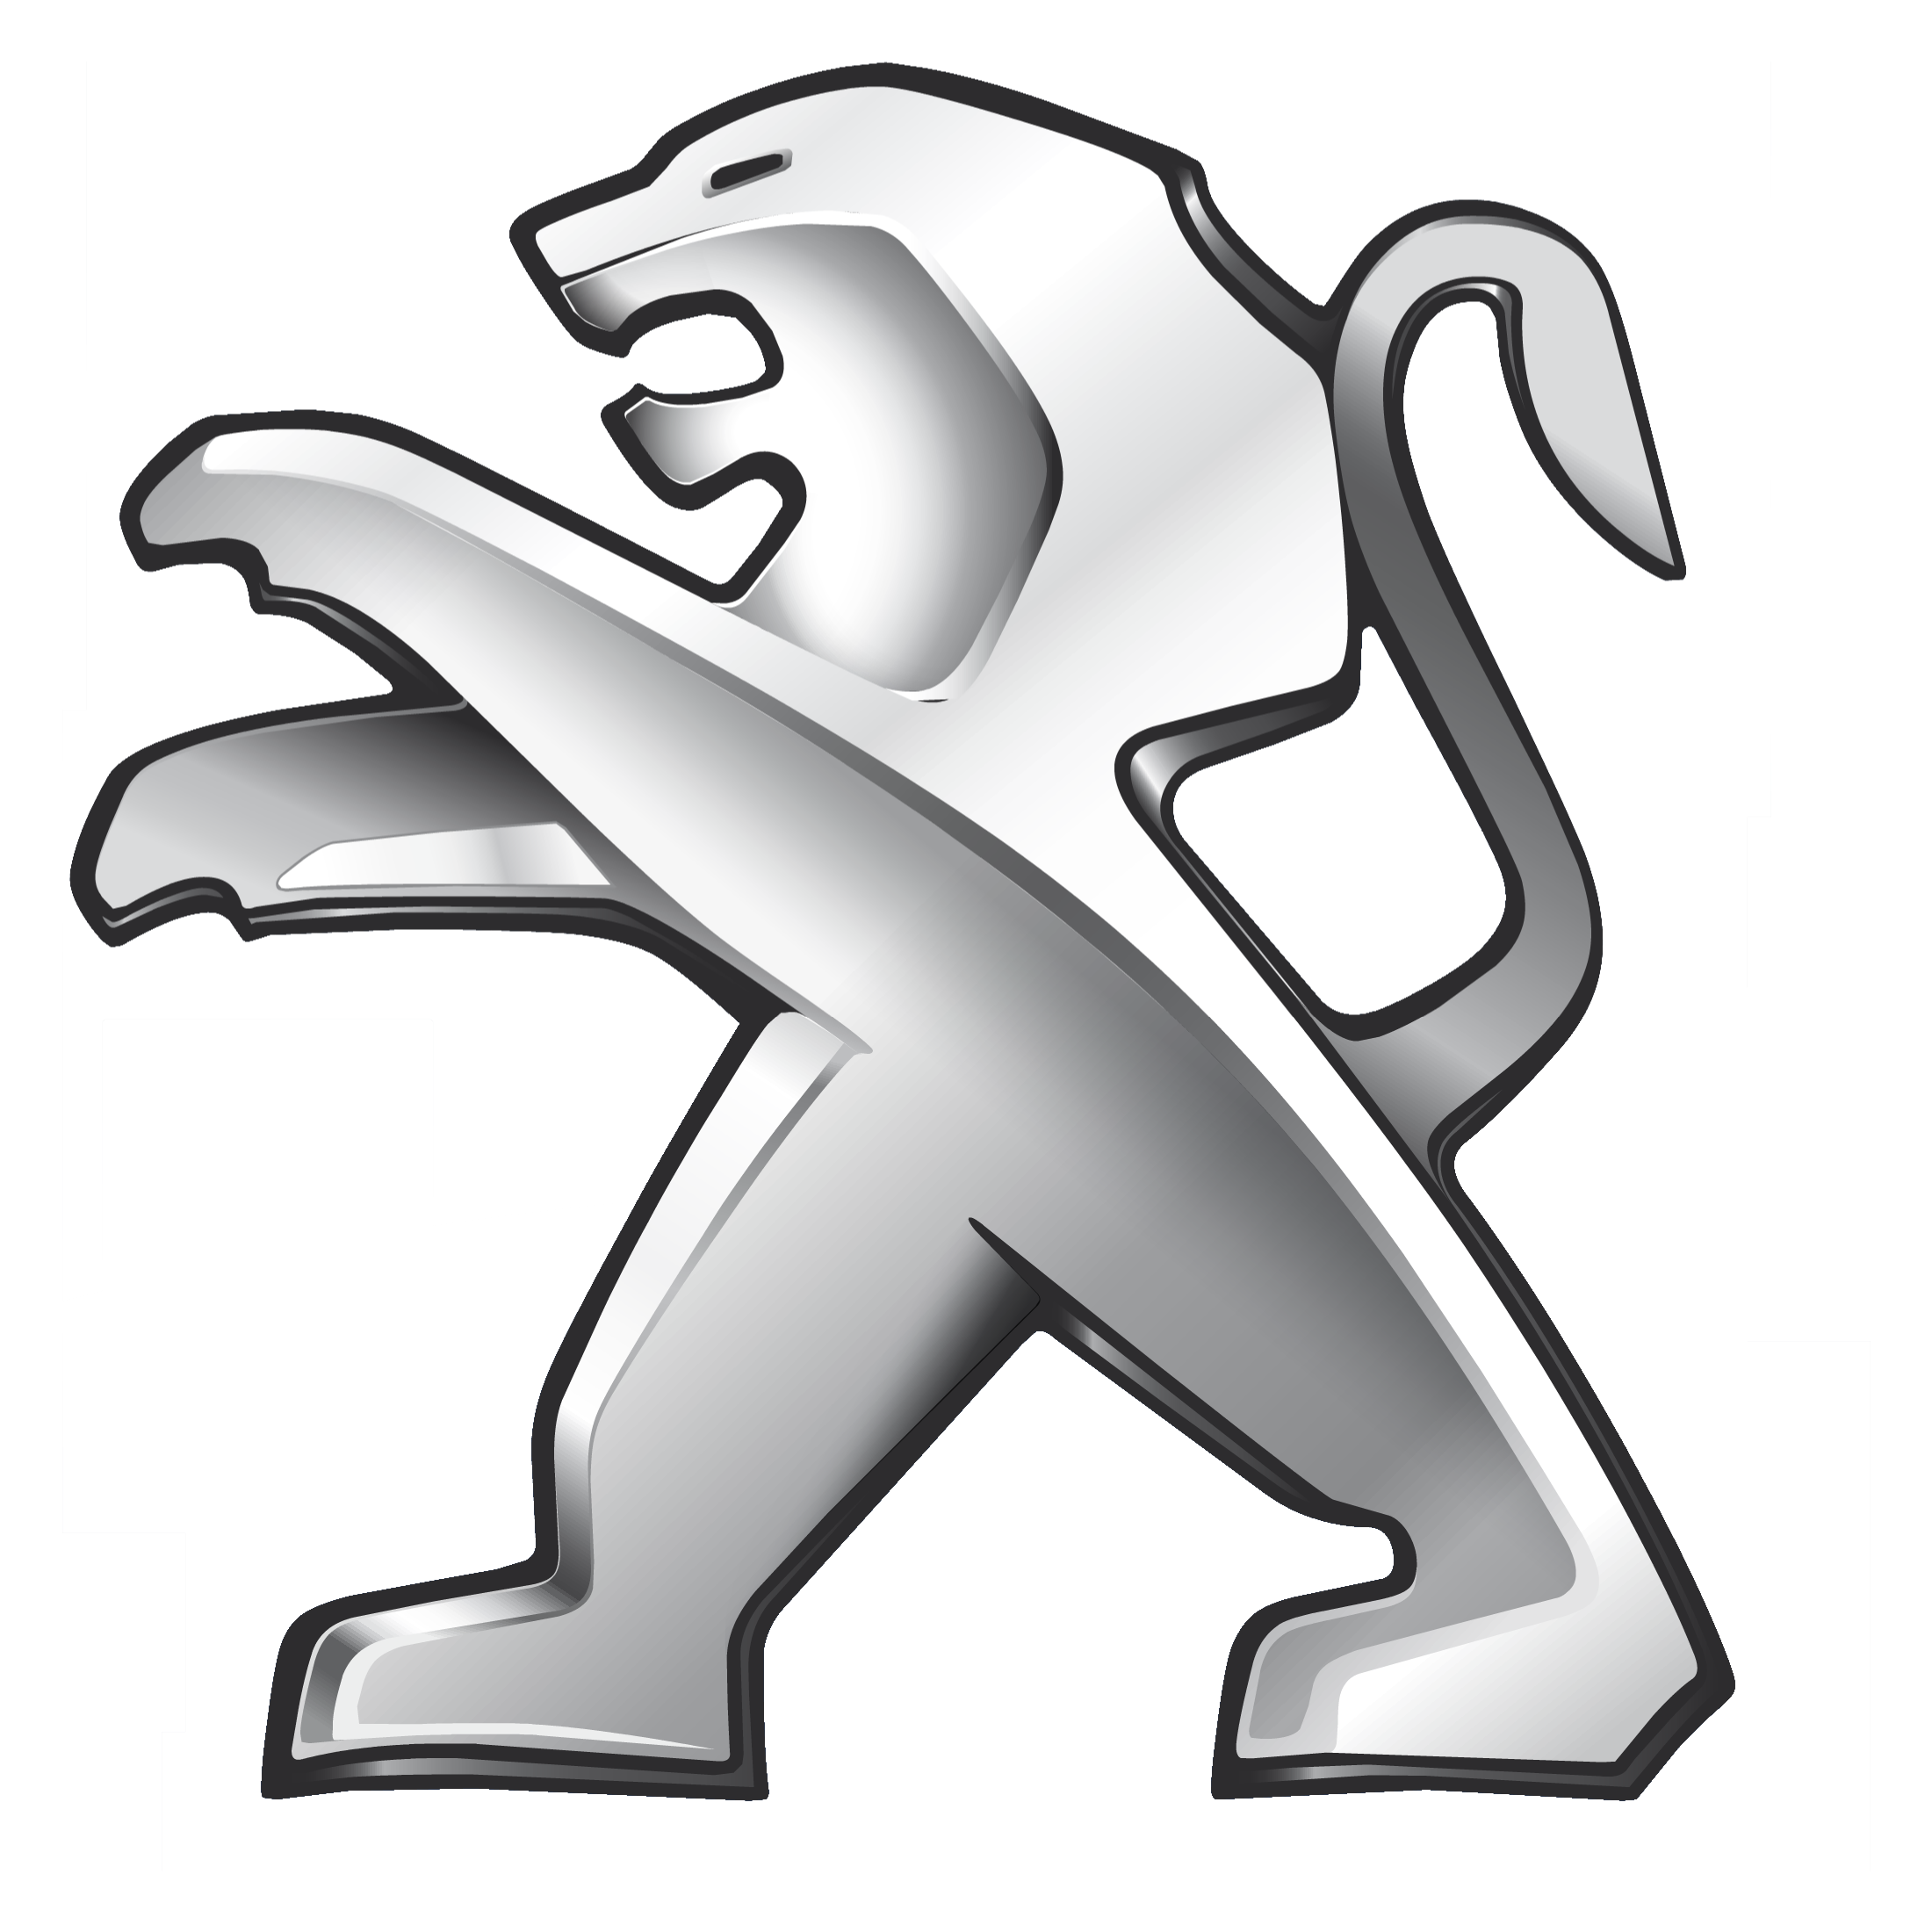 Peugeot Logo, Hd Png, Meaning, Information - Peugeot Eps, Transparent background PNG HD thumbnail